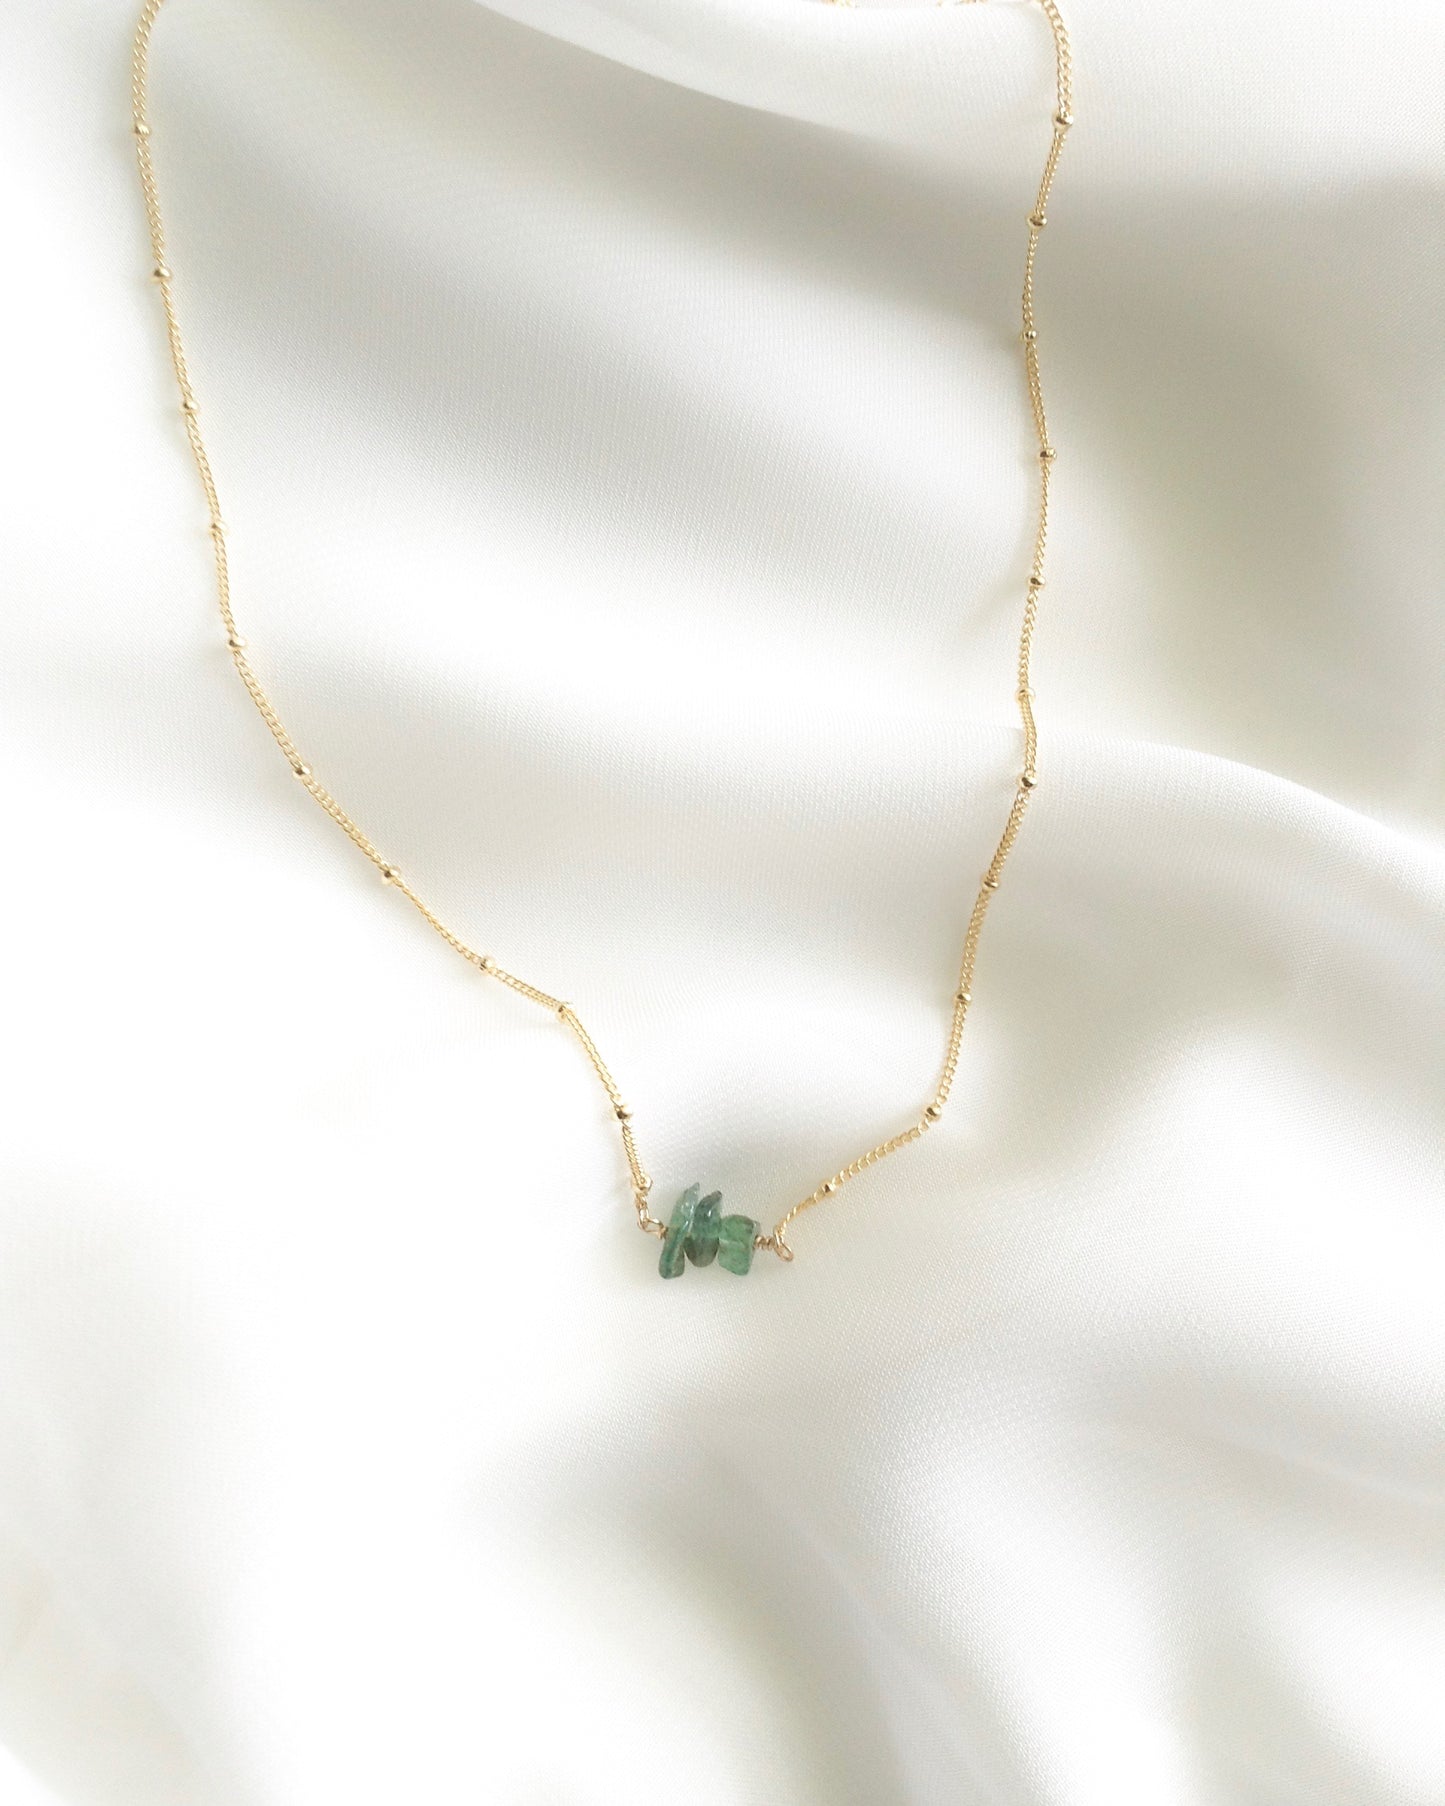 Raw Emerald Tiny Gemstone Necklace in Gold Filled or Sterling Silver | IB Jewelry